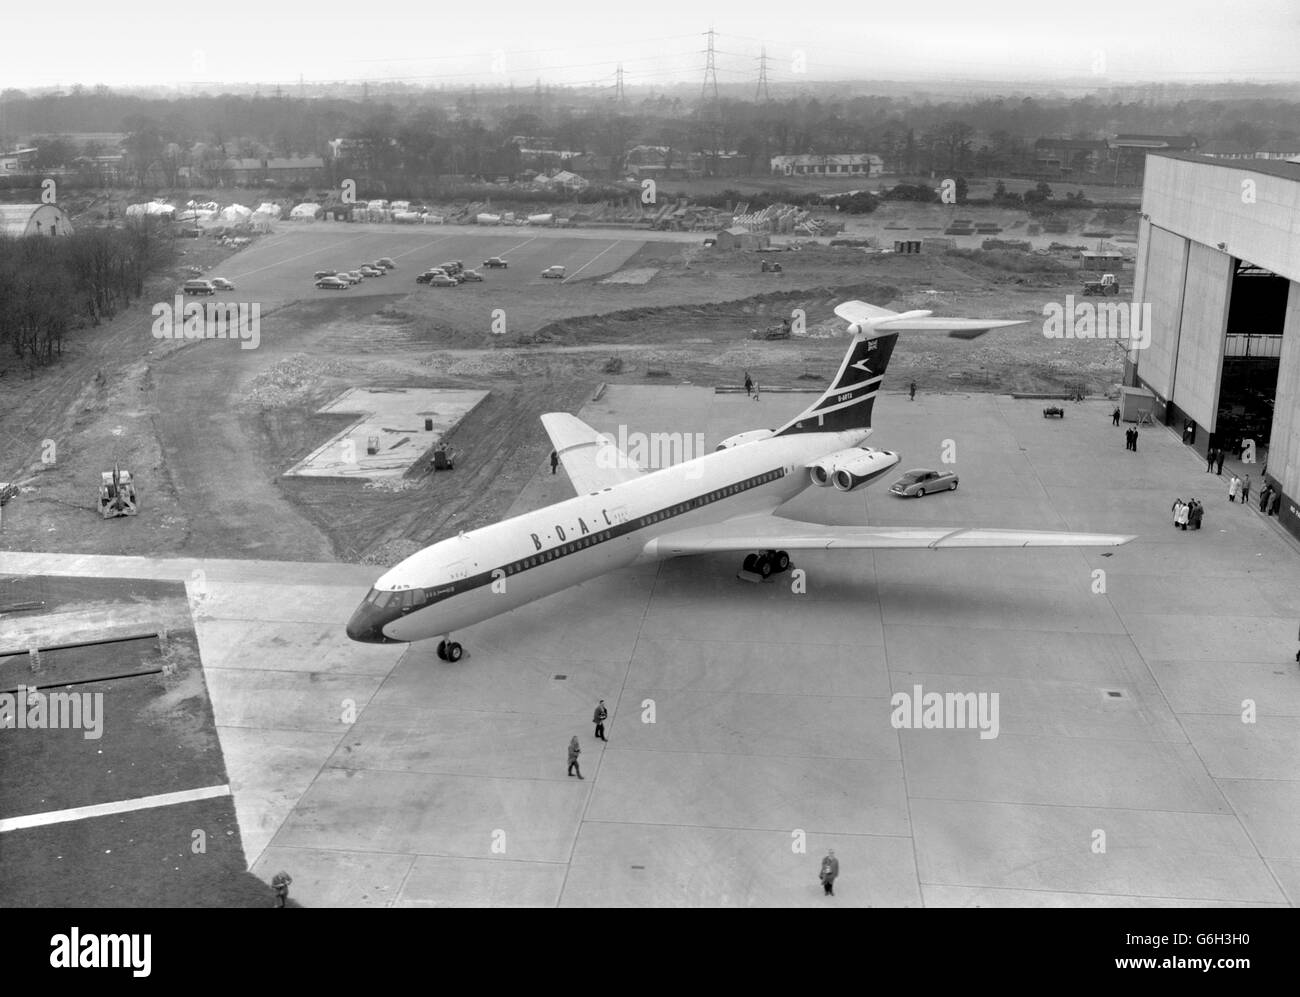 The new Vickers VC10 is taken from its hanger for the first time, at the Brooklands factory in Weybridge, Surrey. The plane is scheduled to make its first flight in May. The airliner, 158 feet long, has four Rolls-Royce Conway engines mounted in pairs at the tail. Forty-two of the planes have been ordered for BOAC. Automatic landing devices are to be incorporated in the VC10. Stock Photo